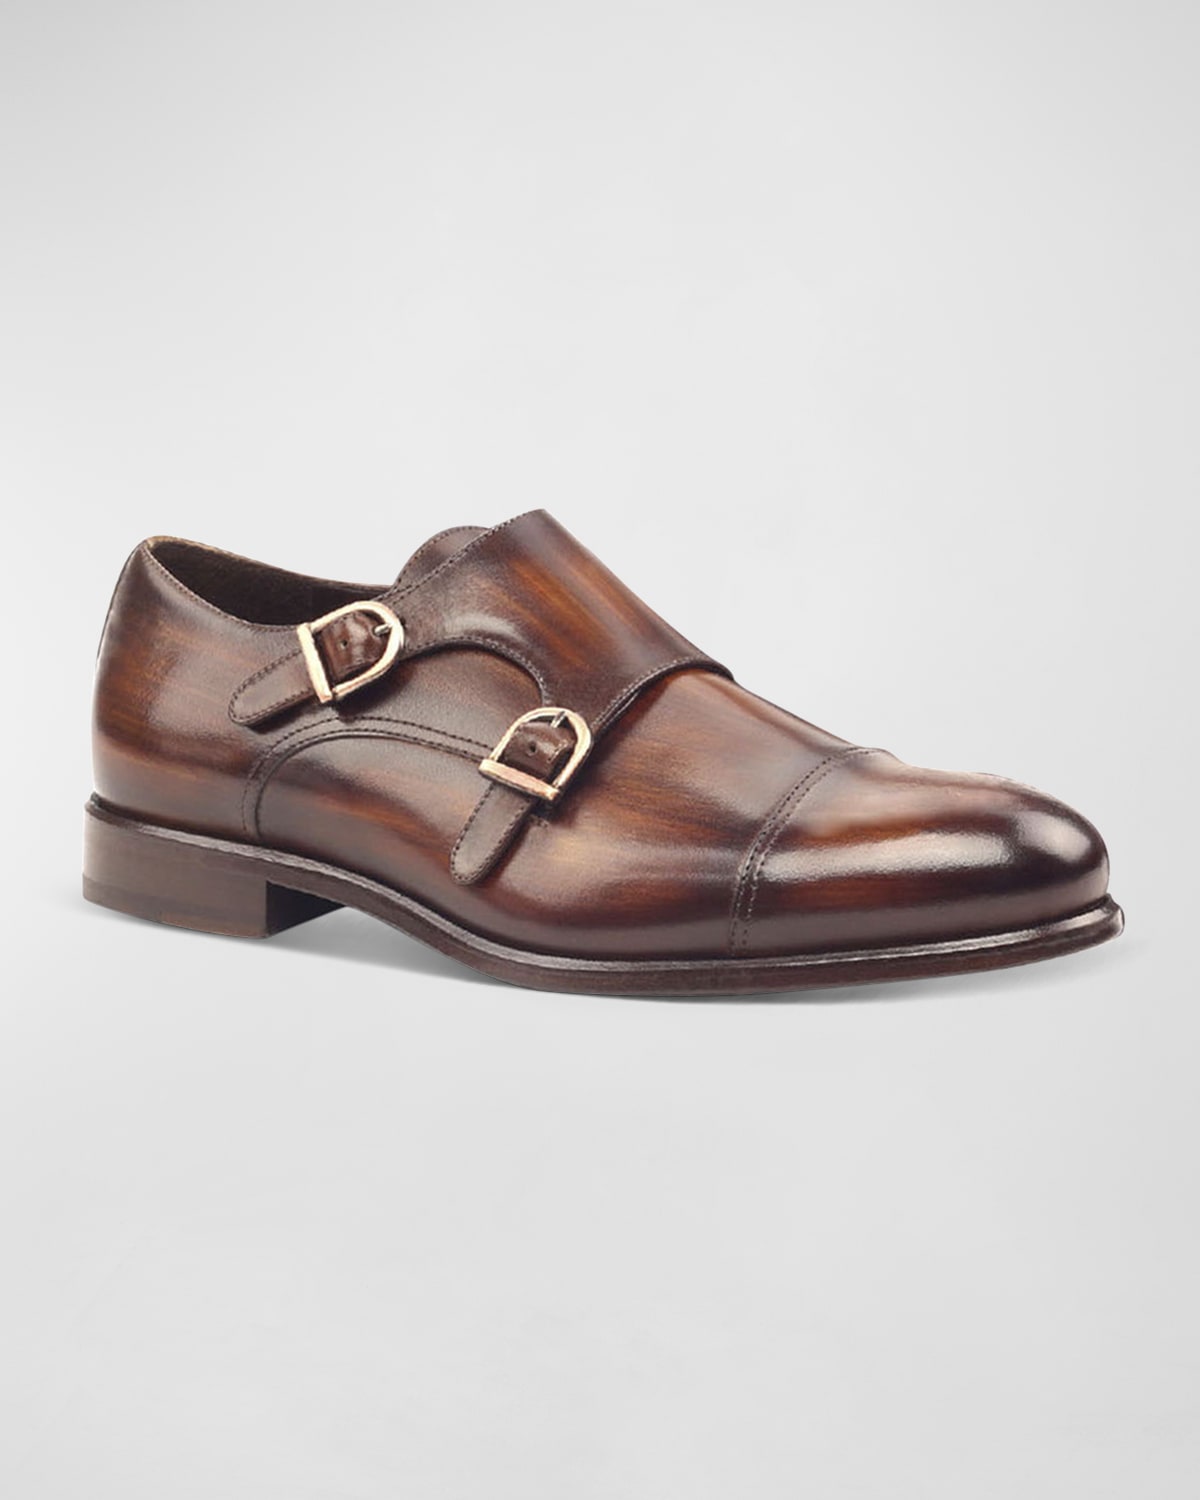 TOM FORD Men's Burnished Double-Monk Leather Loafers | Neiman Marcus